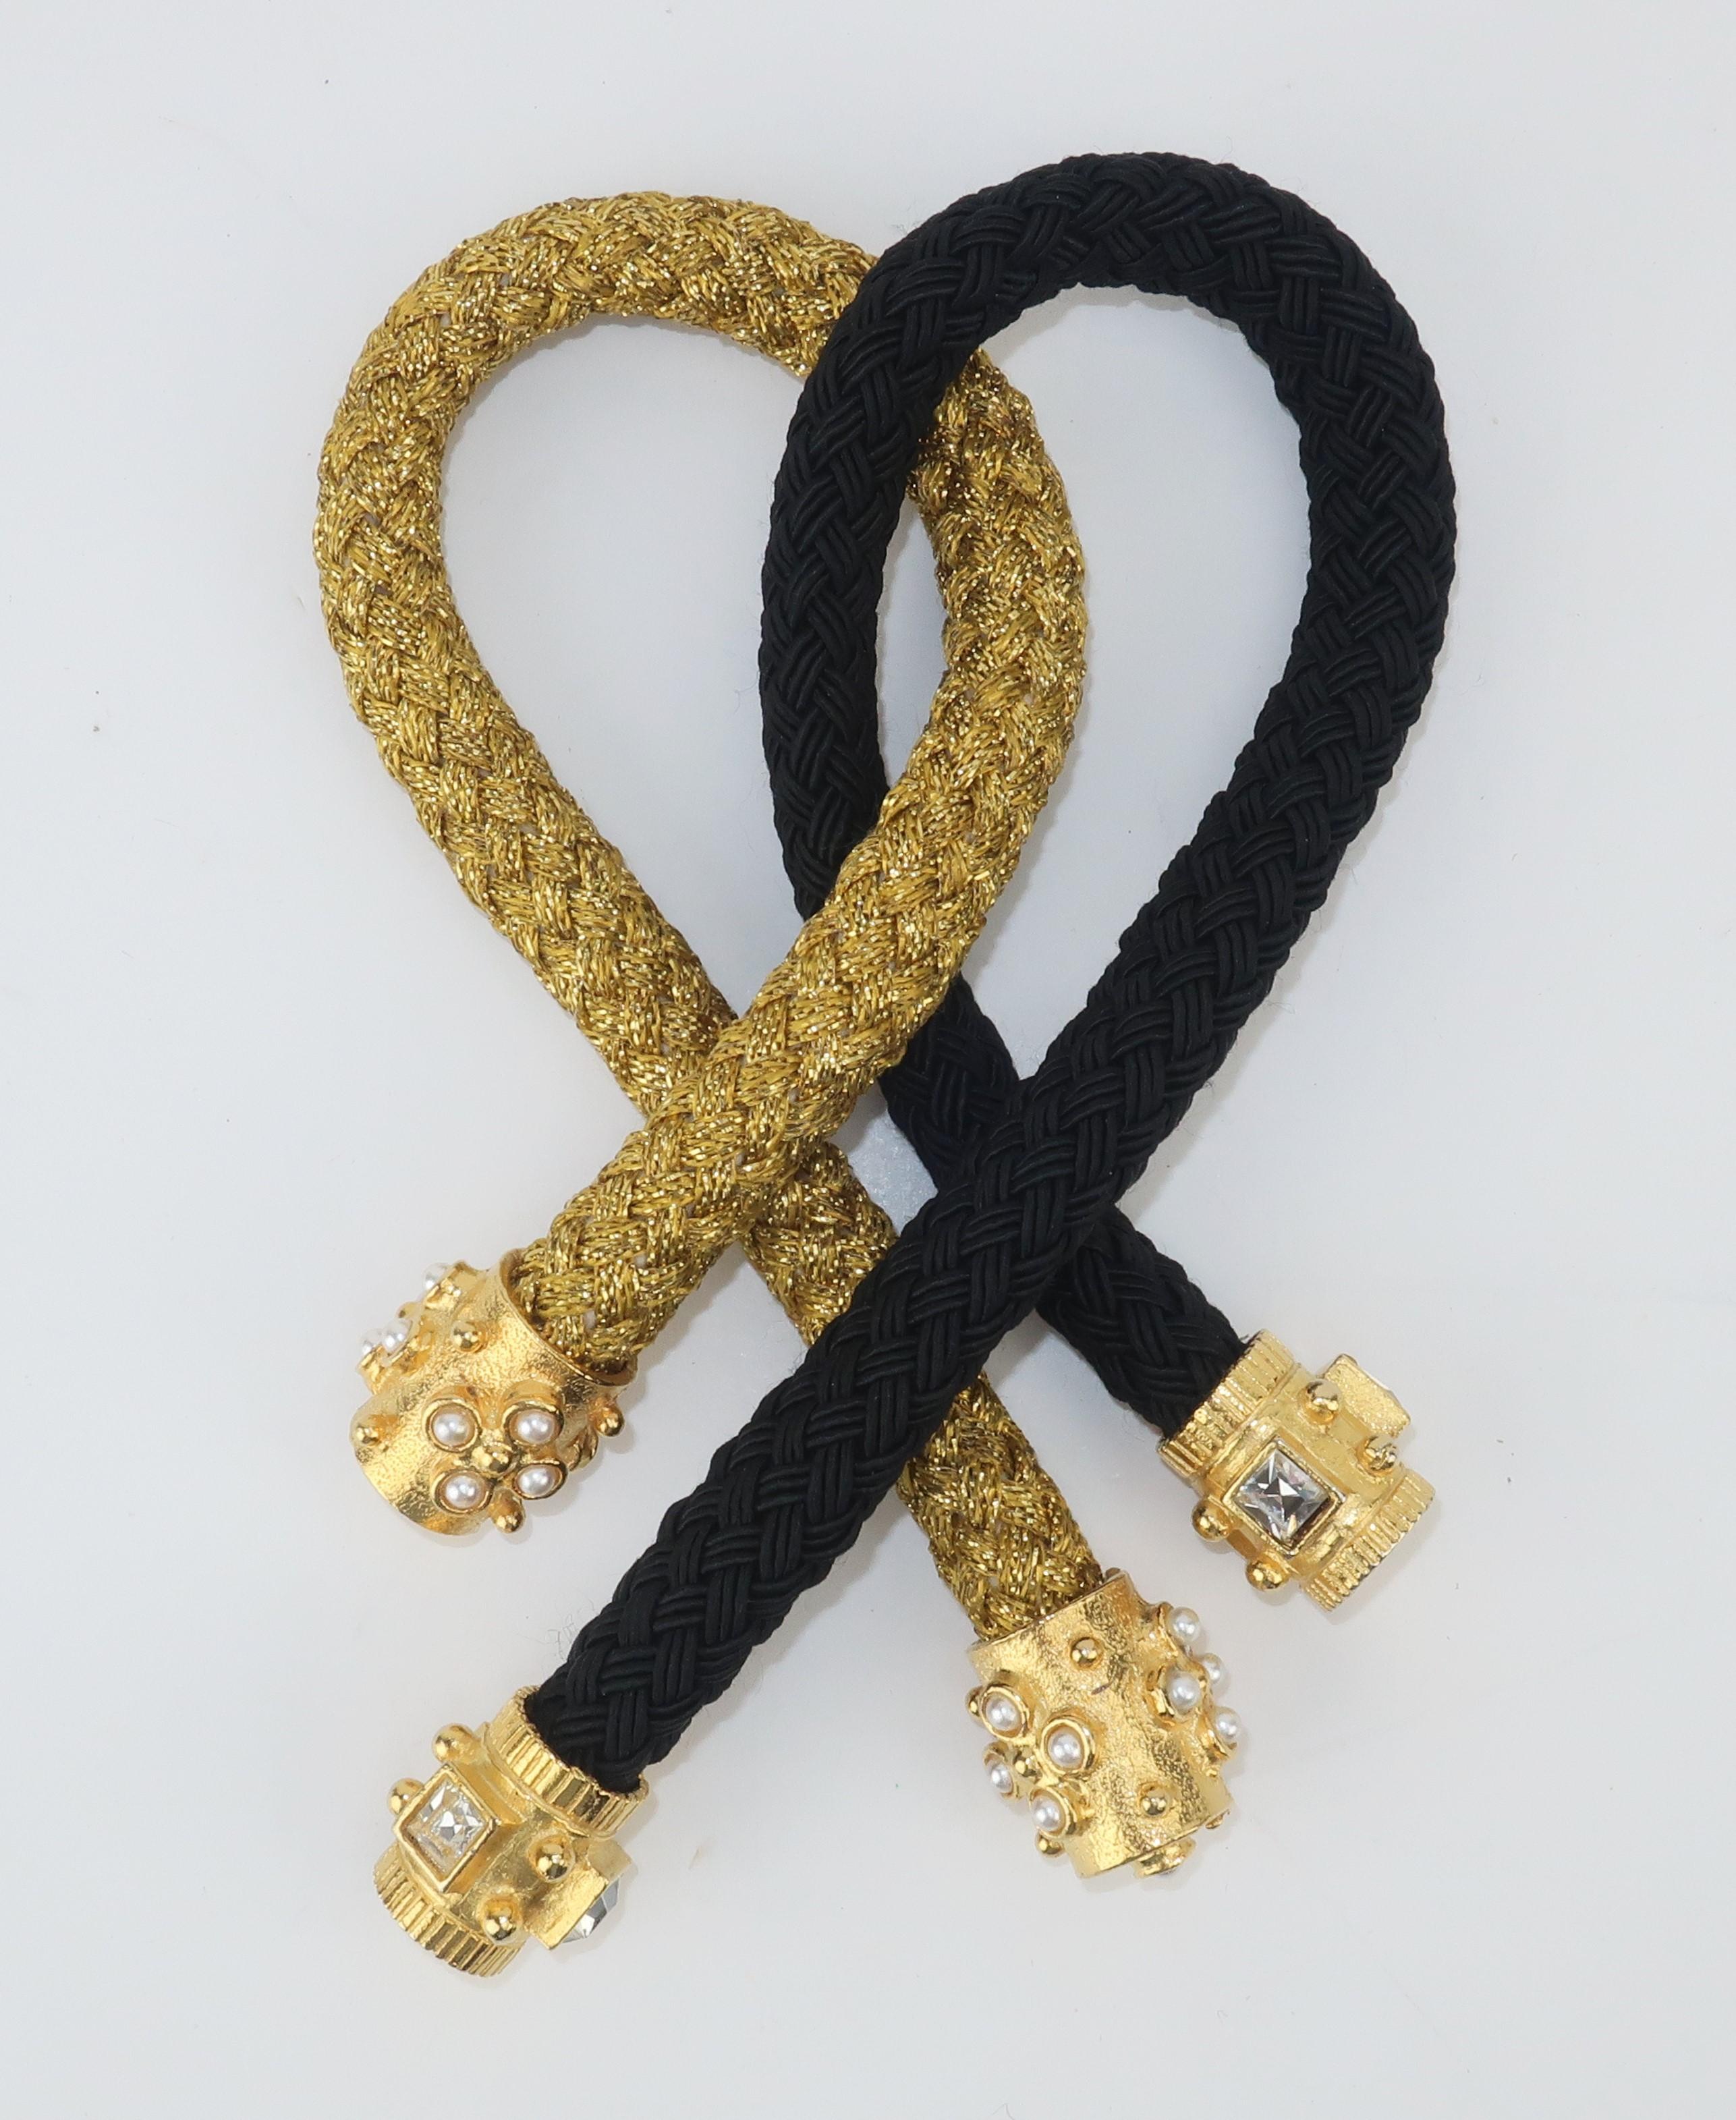 Put a little polish on your pony with these ornate hair ties.  Both pieces are braided with one in a metallic gold and the other in black.  Both are accented with weighty gold tips in a byzantine style design with one accented by pearls and the